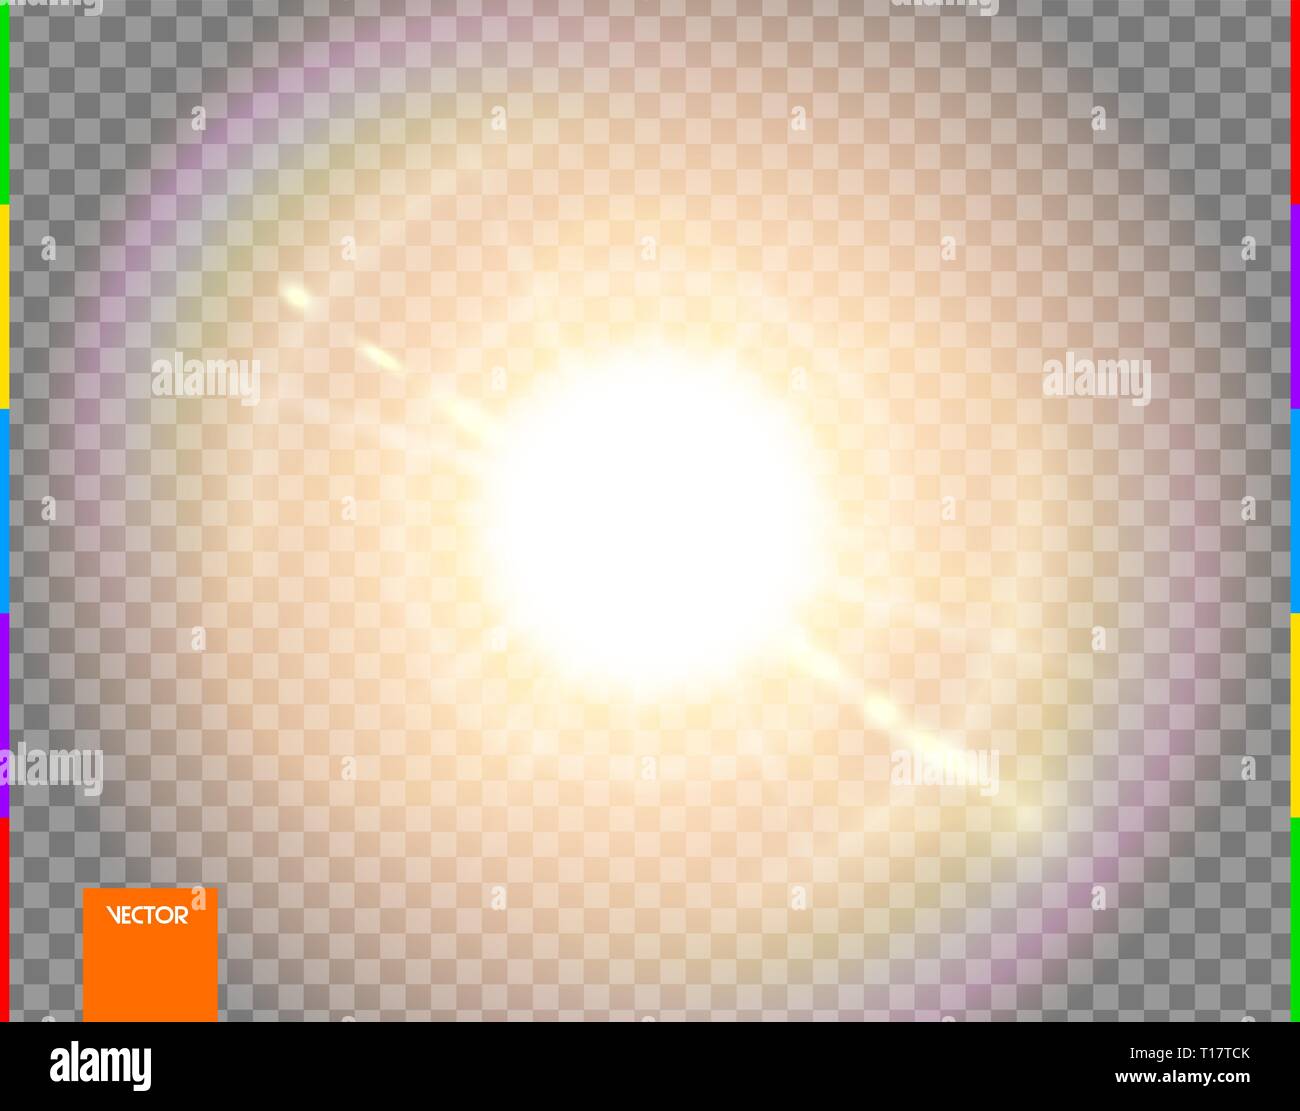 Vector sun. Glow transparent sunlight special lens flare light effect. Isolated flash rays and spotlight. Golden front translucent background. Blur Stock Vector